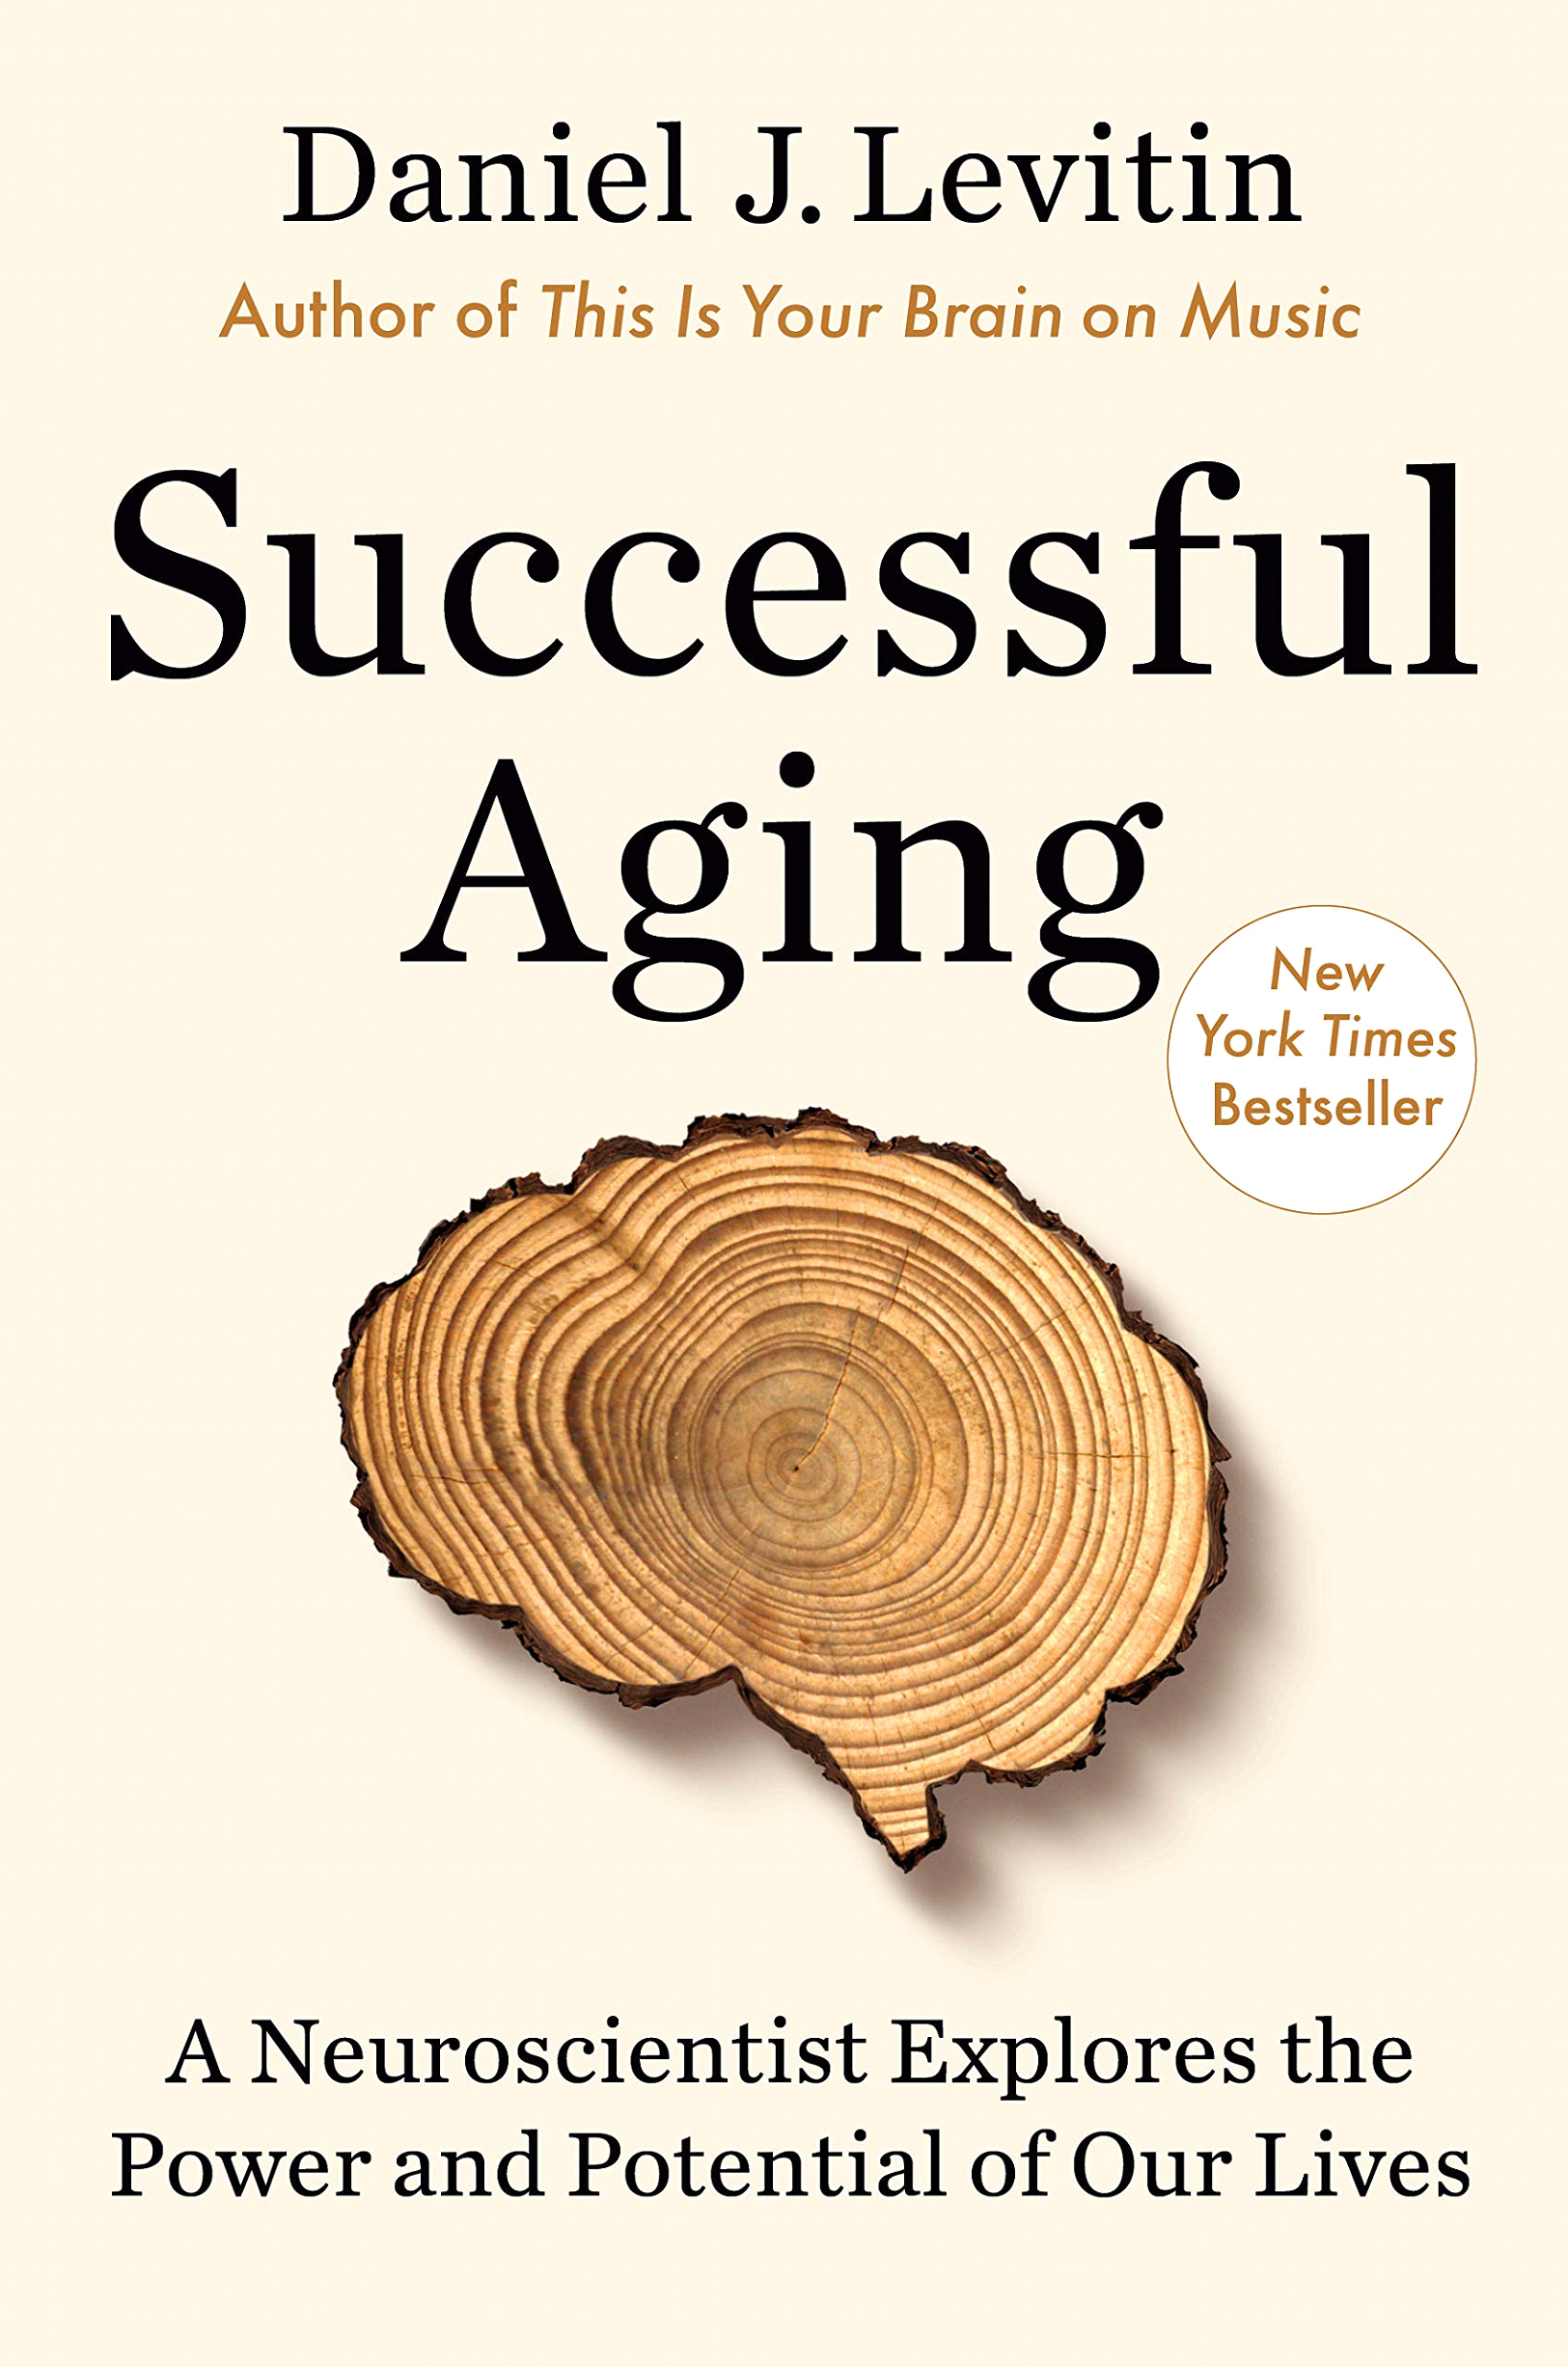 Featured image for “Successful Aging by Daniel J. Levitin ”